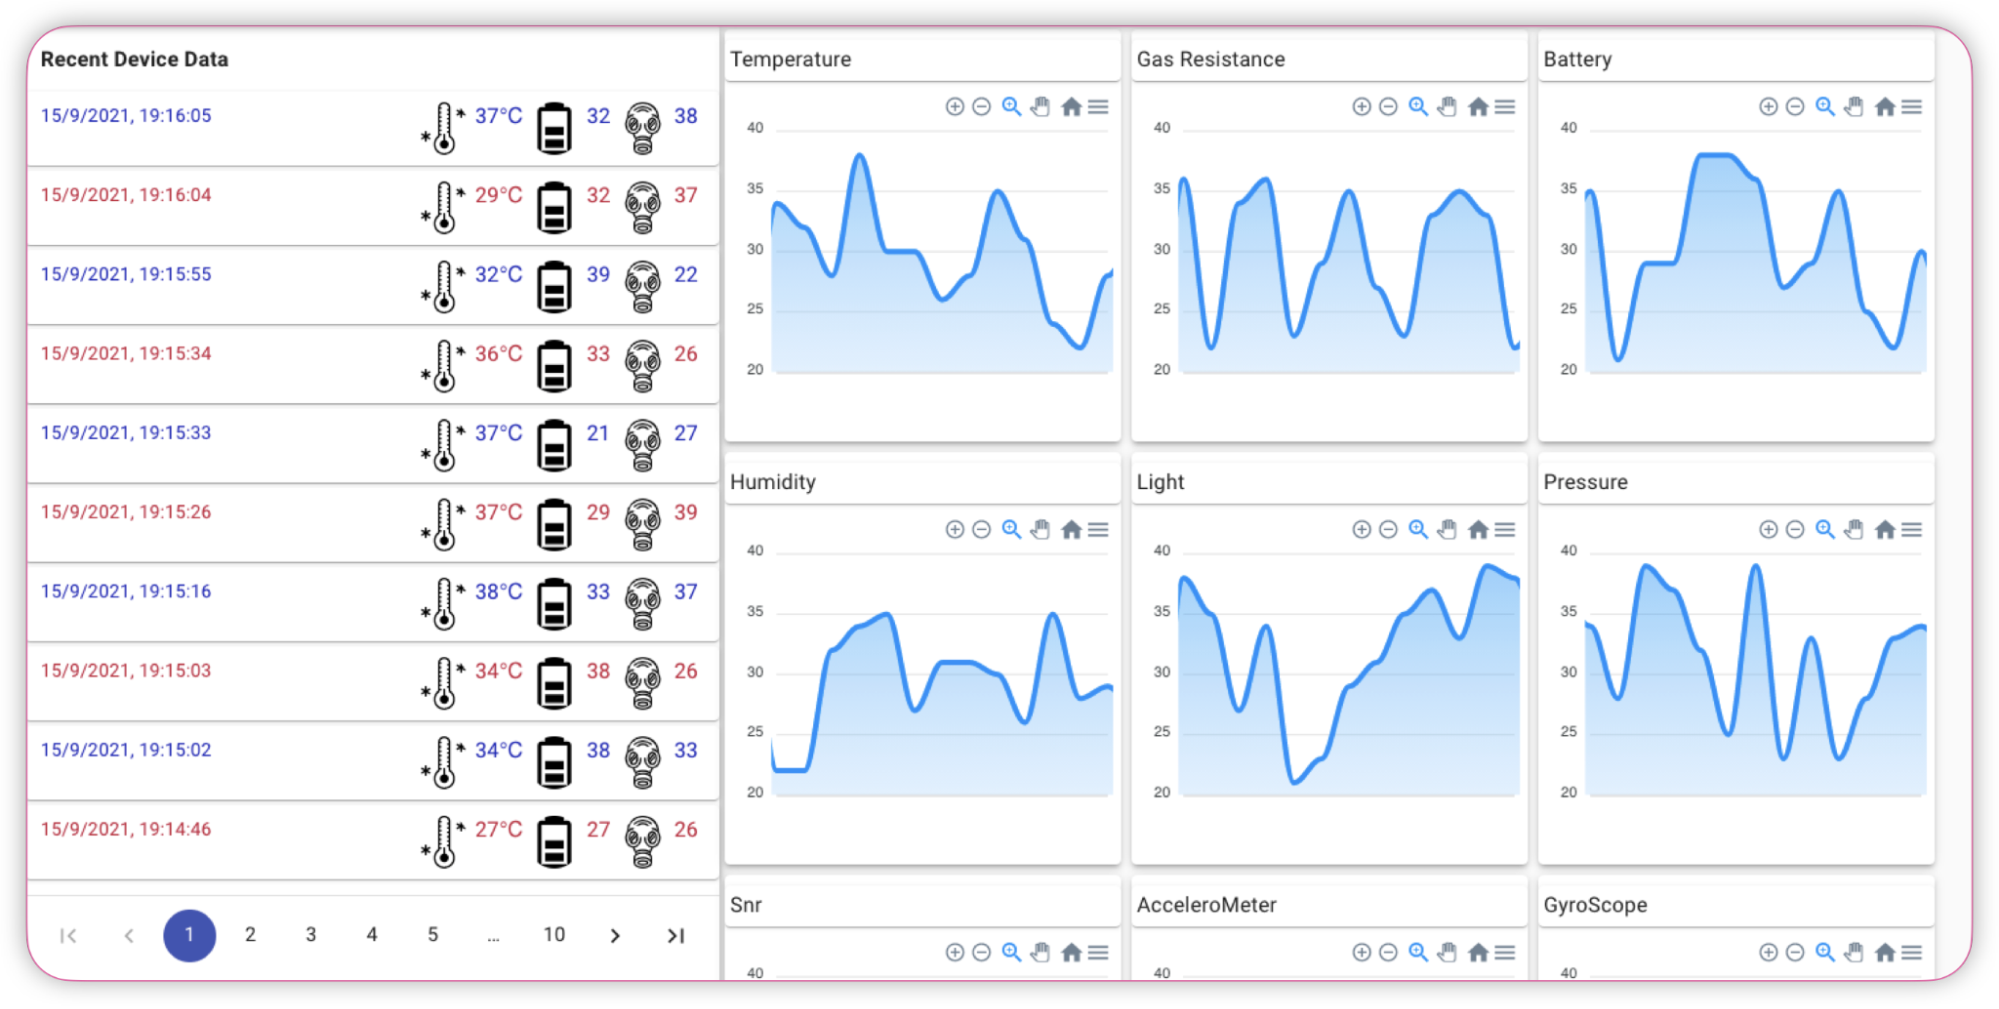 Dashboard displaying data on: Temperature, Gas Resistance, Battery, Humidity, Light, Pressure